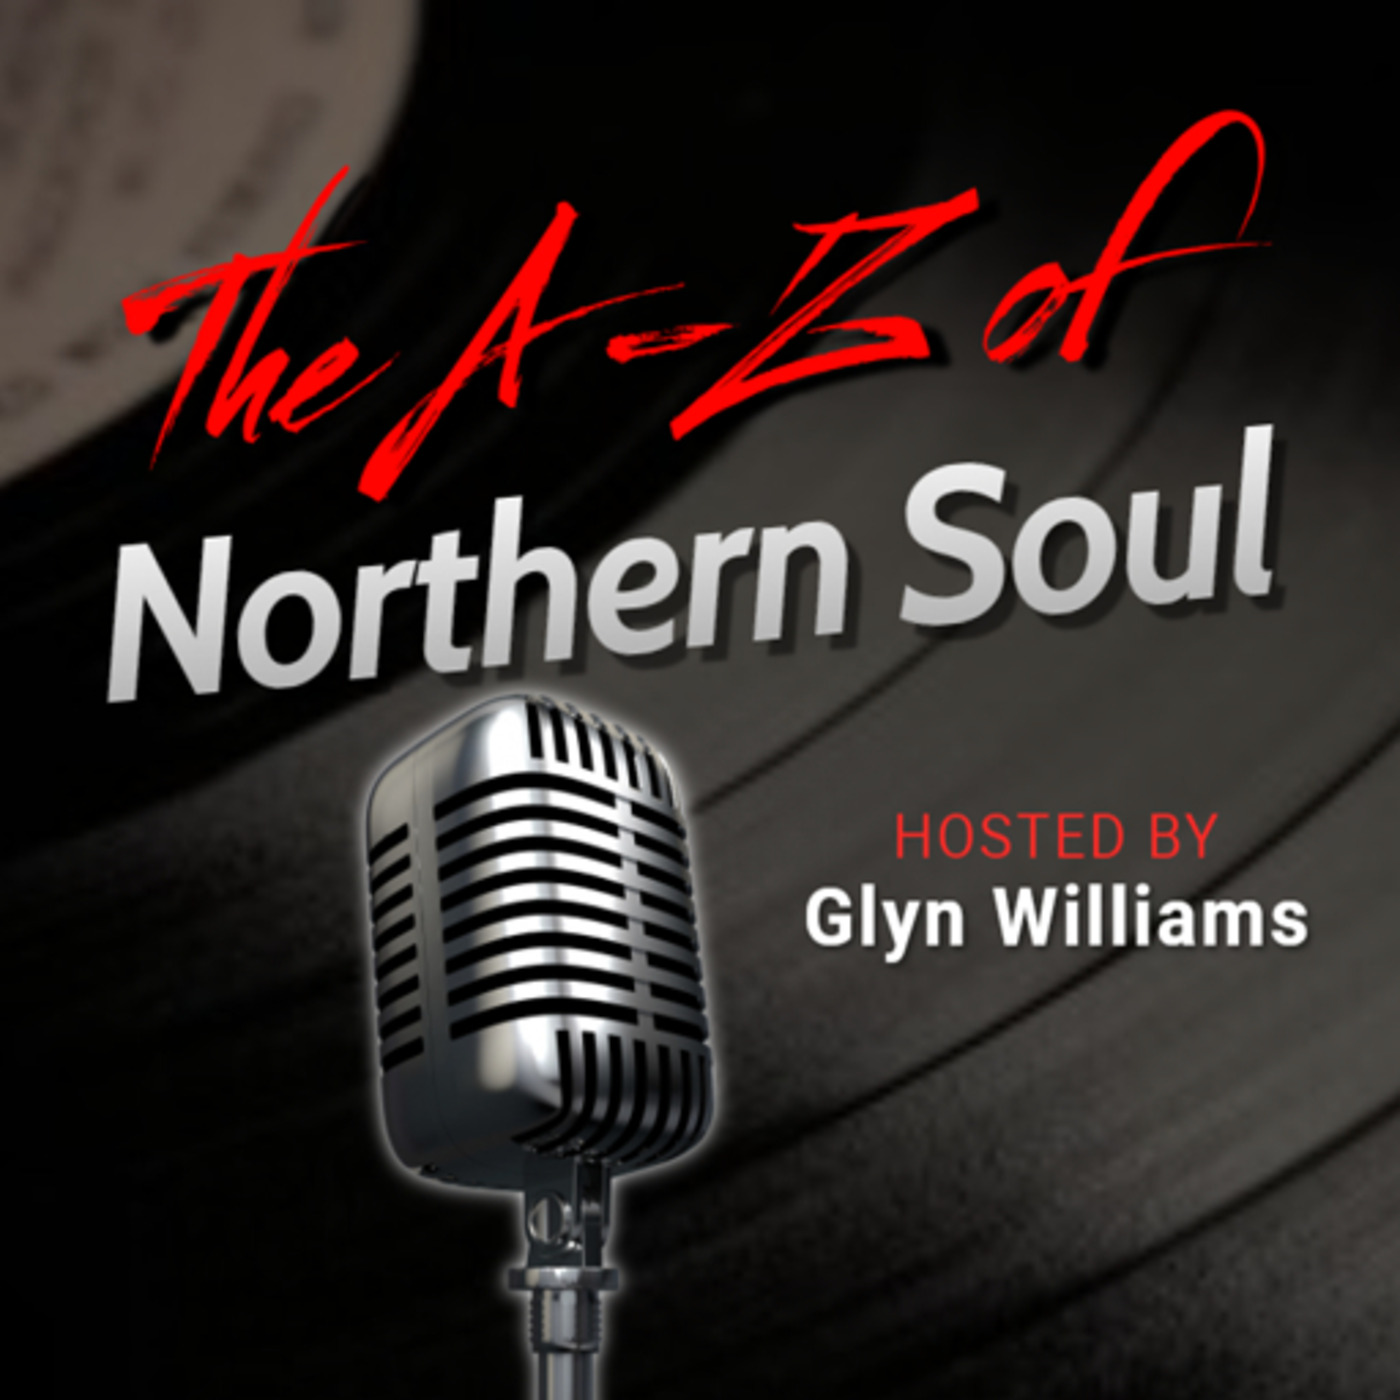 The A-Z of Northern Soul E014